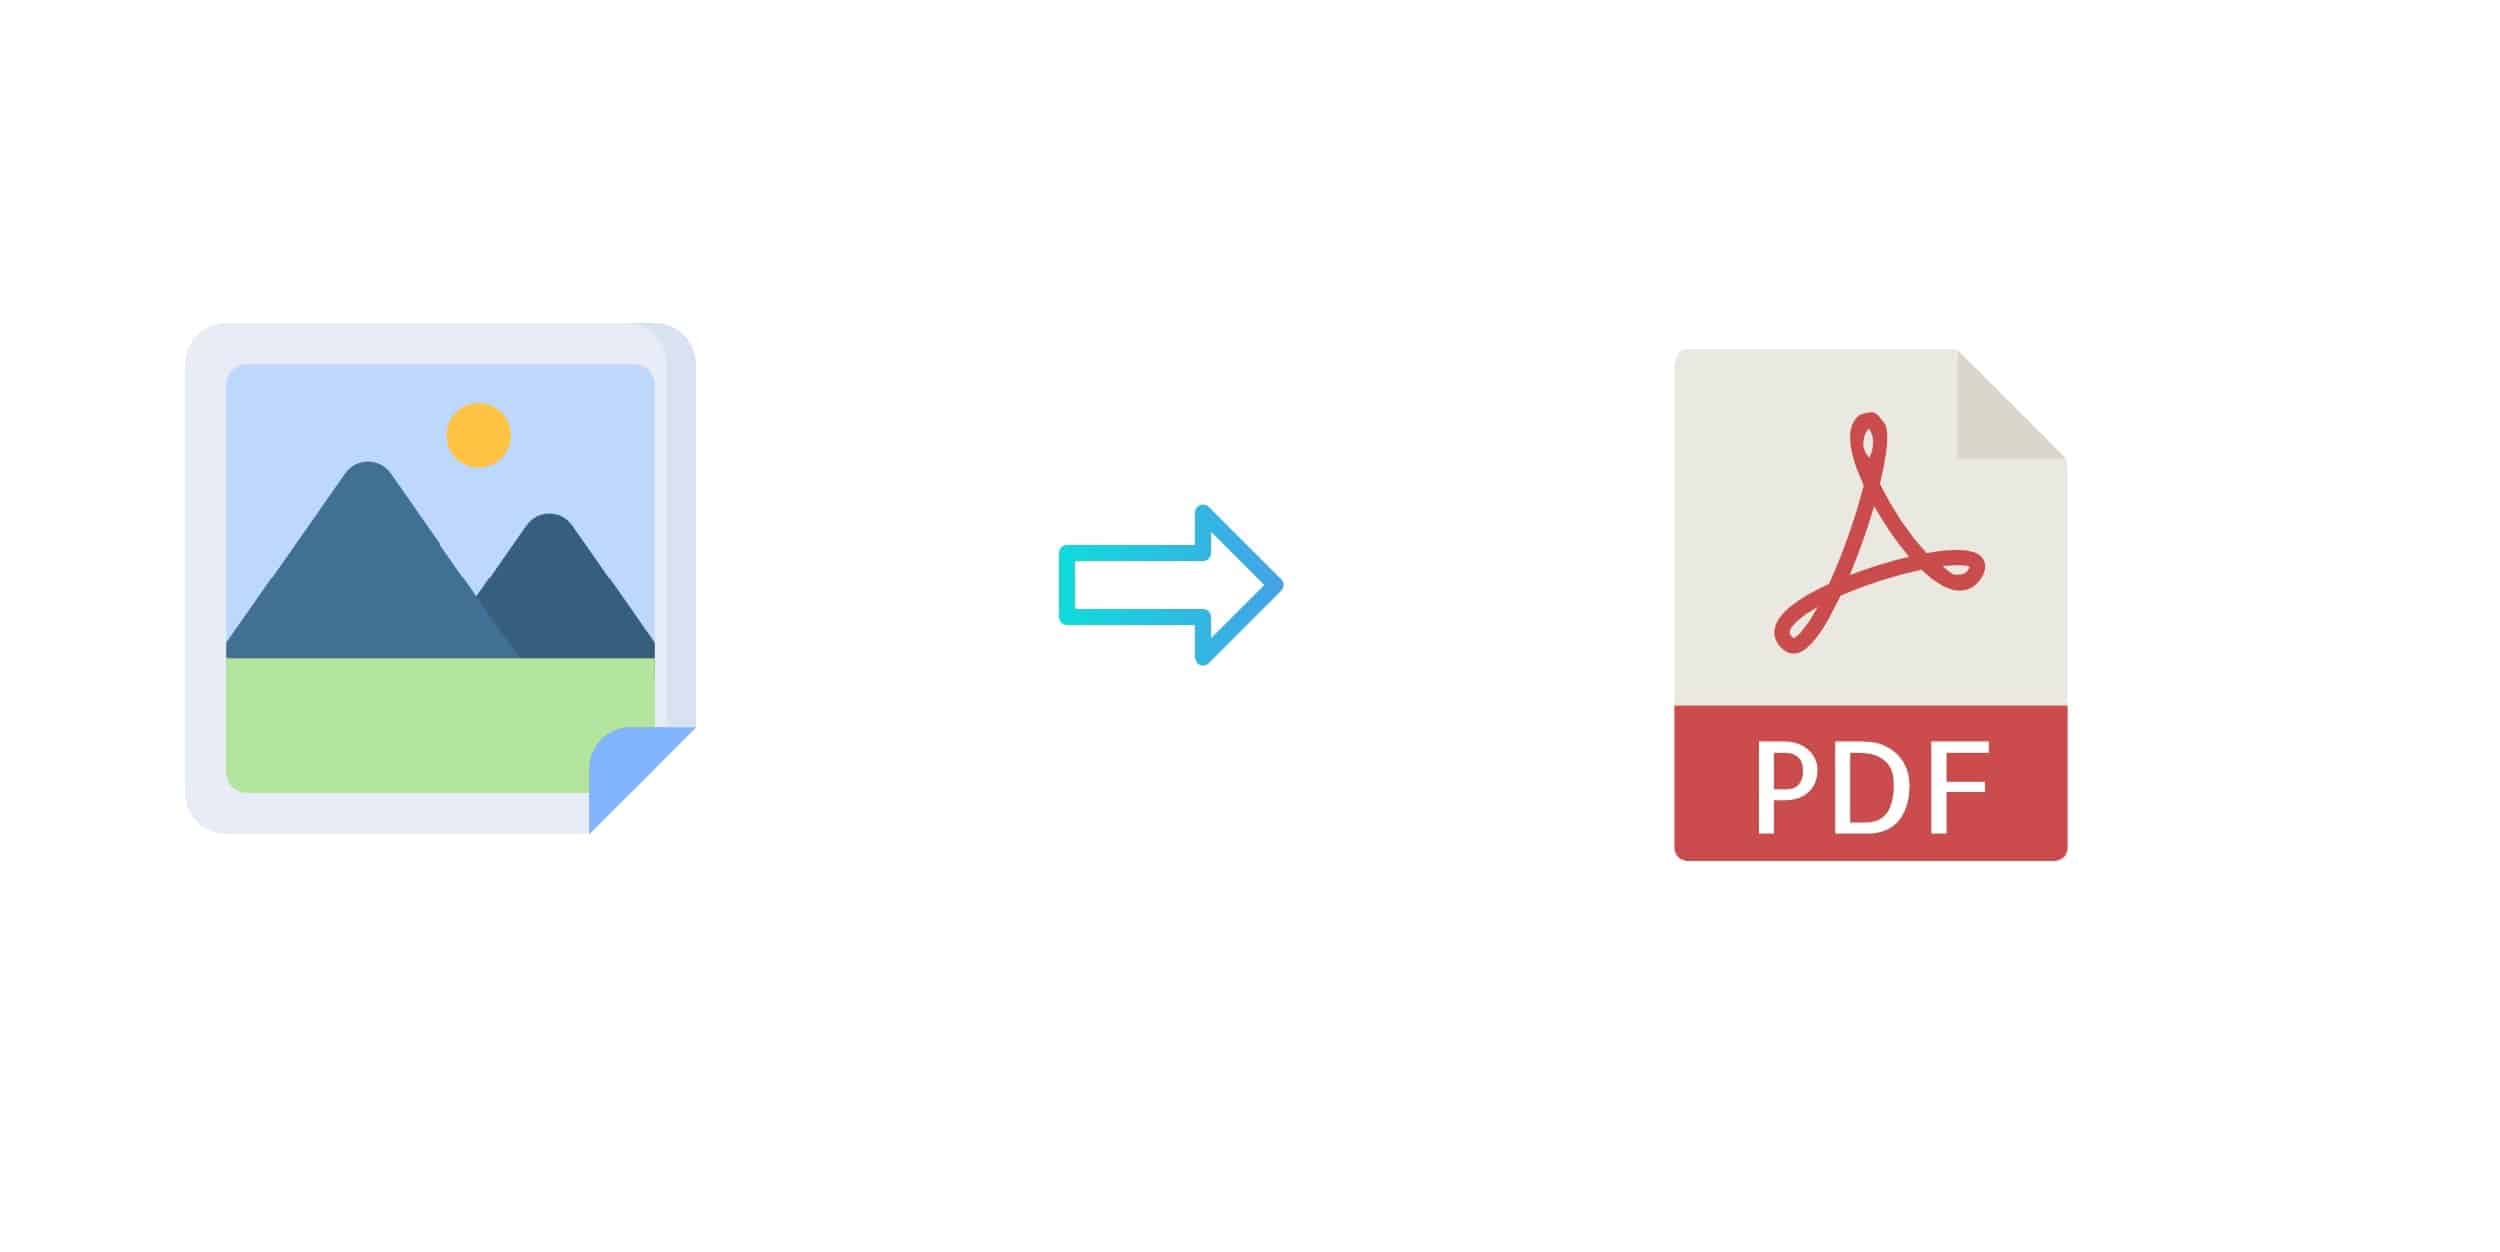 image with picture, arrow and PDF icons